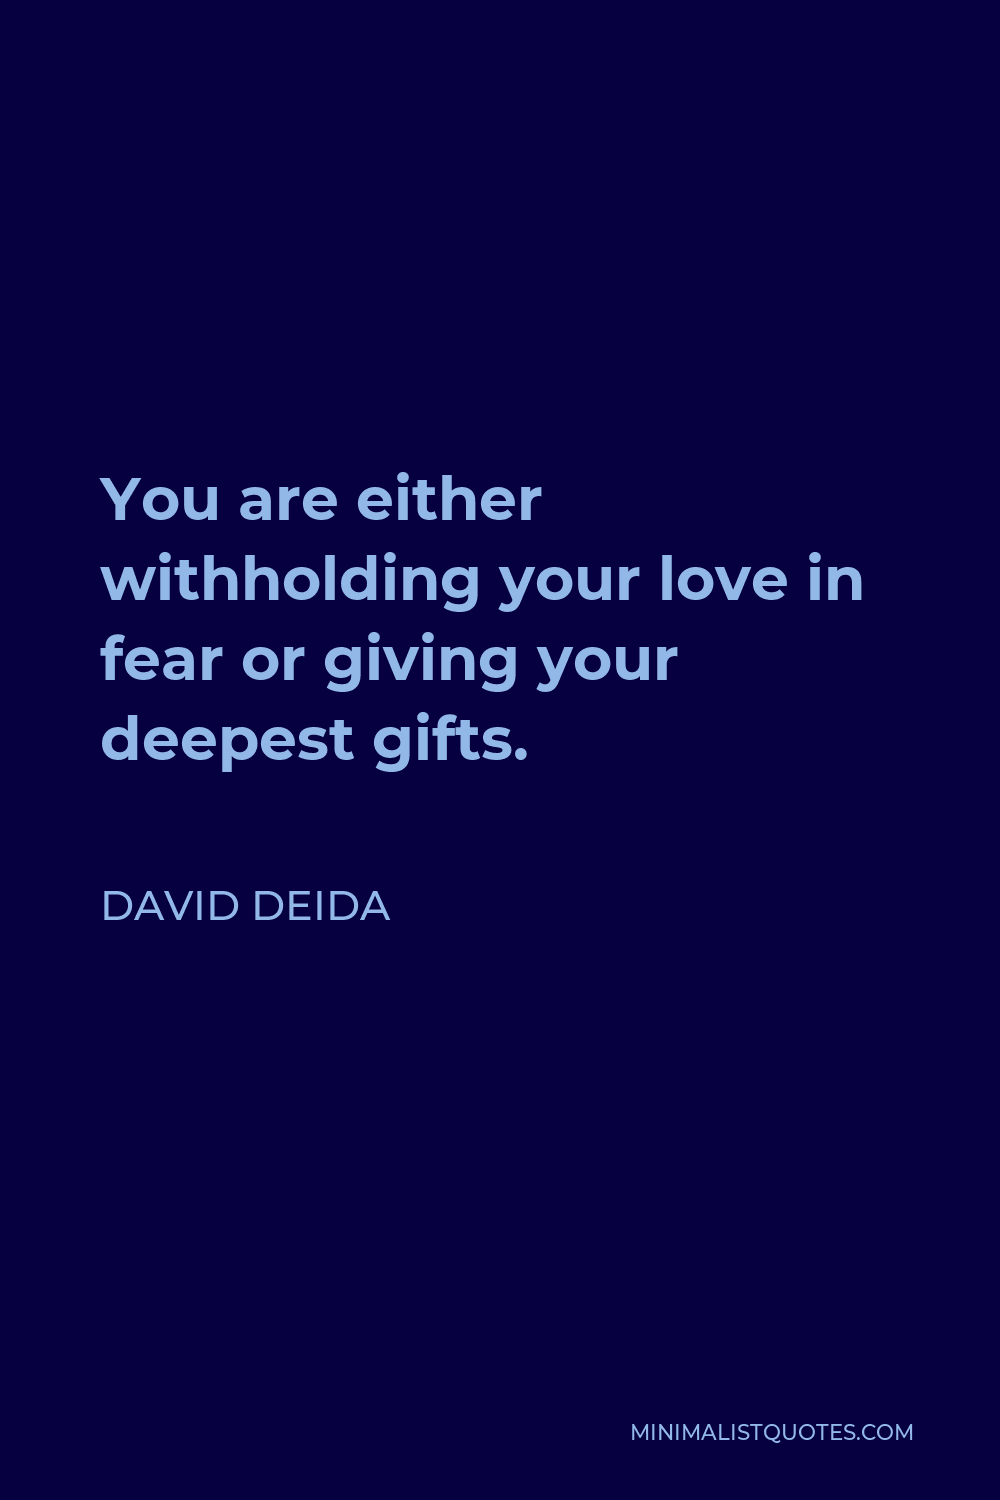 David Deida Quote - You are either withholding your love in fear or giving your deepest gifts.